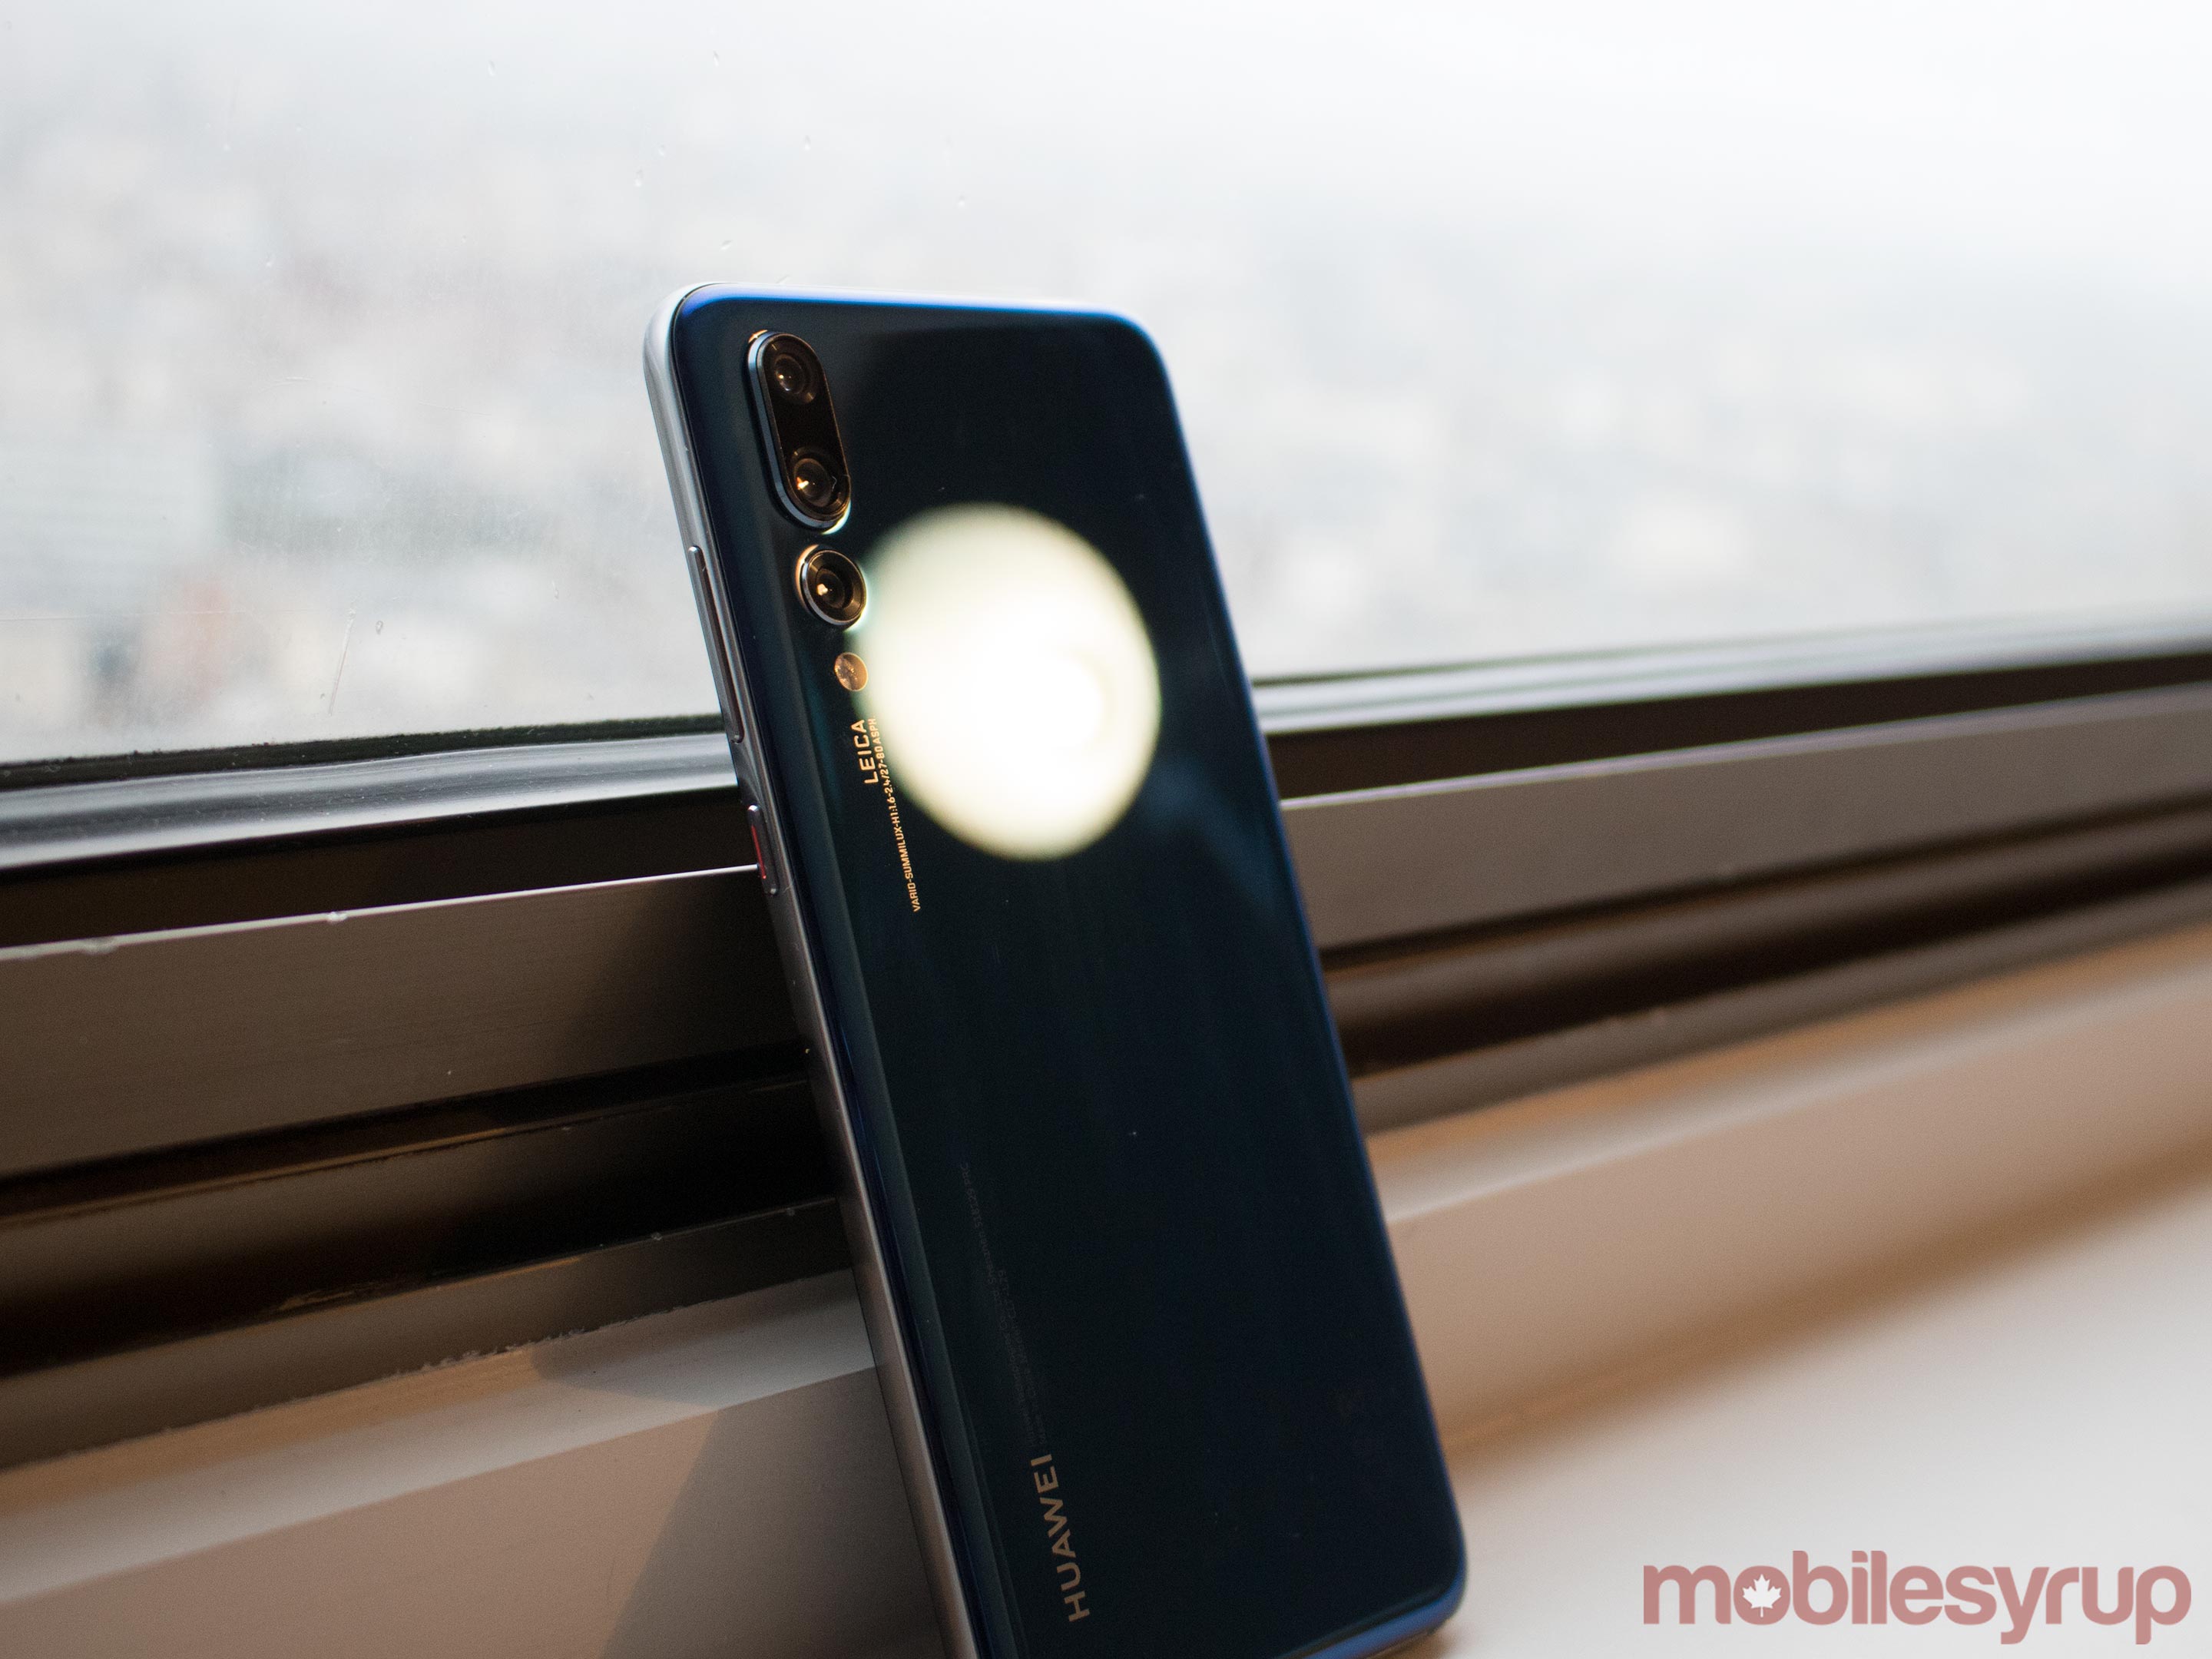 Huawei P20 Pro with light shining on rear